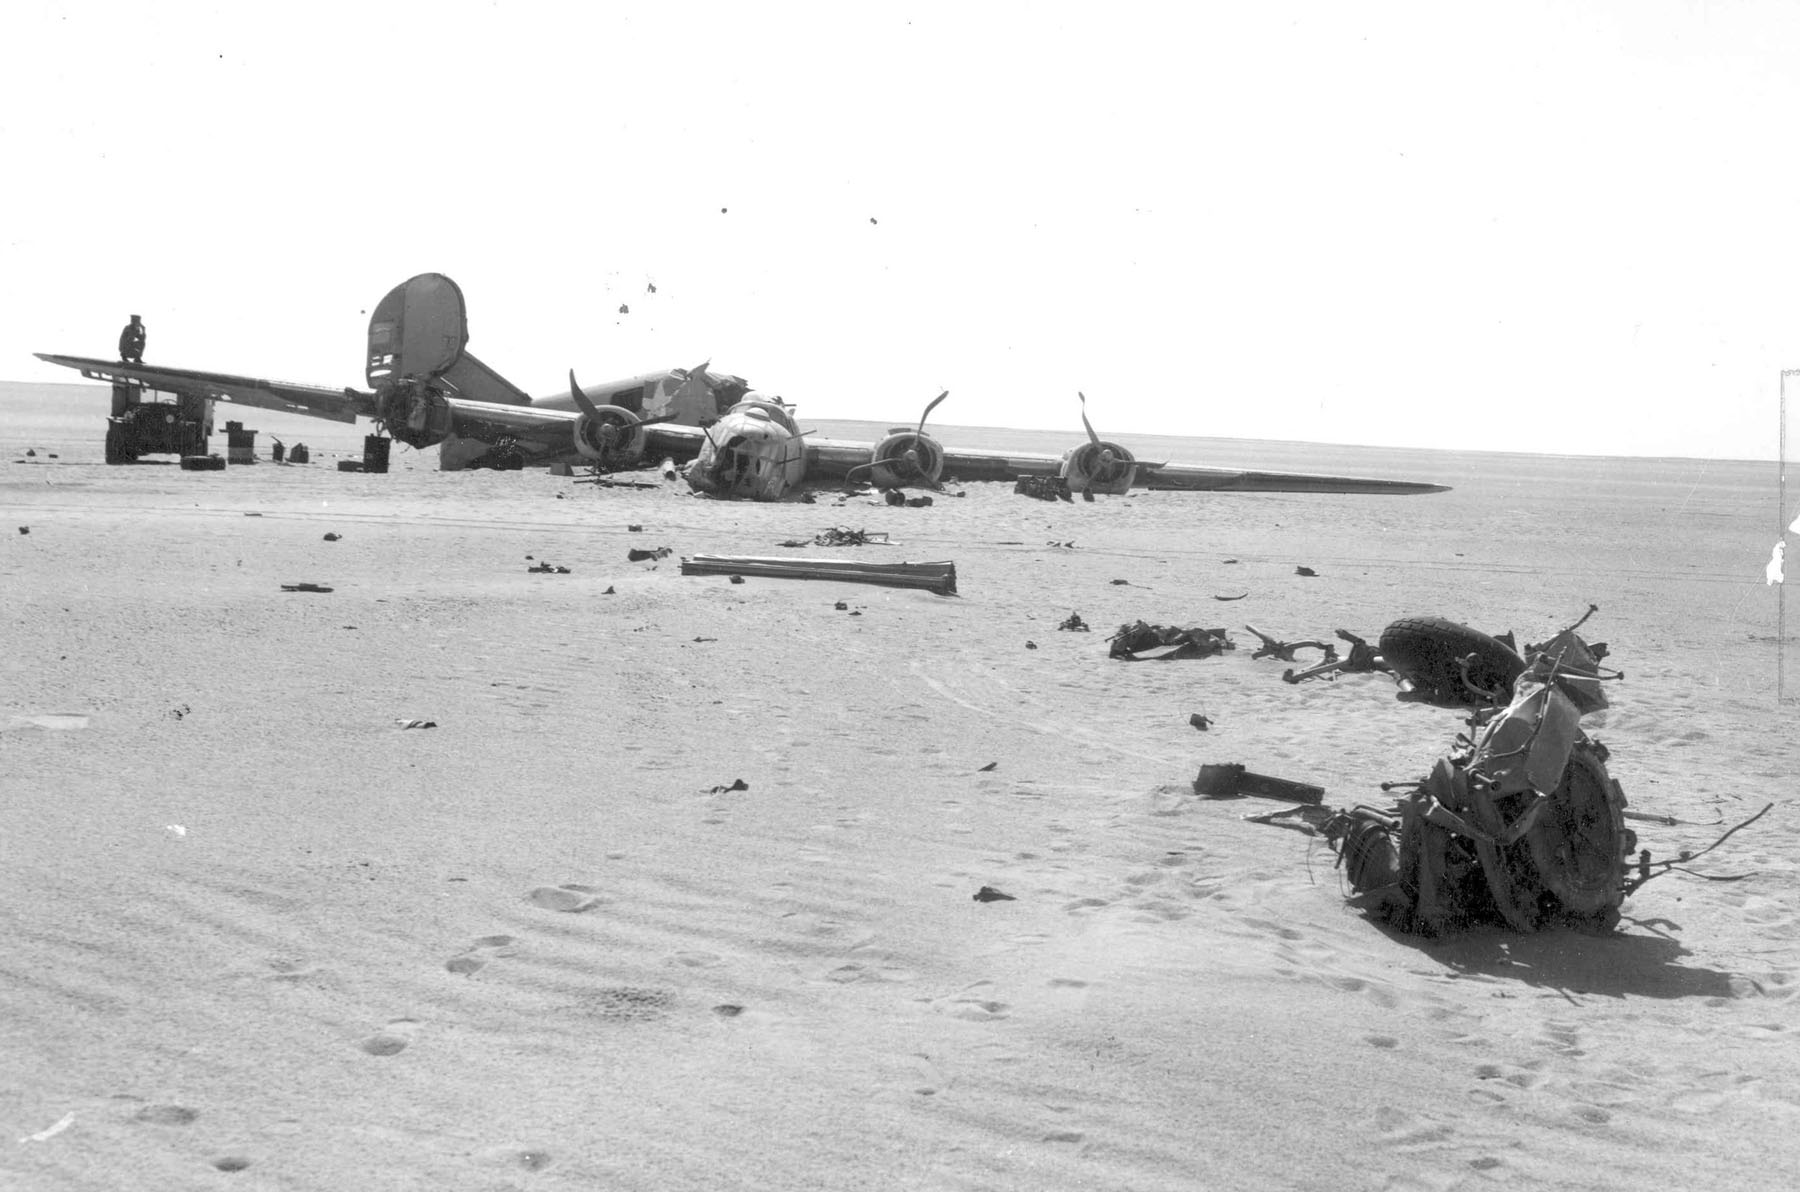 Aircraft parts were strewn by the Consolidated B-24D "Lady Be Good" as it skidded to a halt amid the otherwise emptiness of the desert. (U.S. Air Force photo)